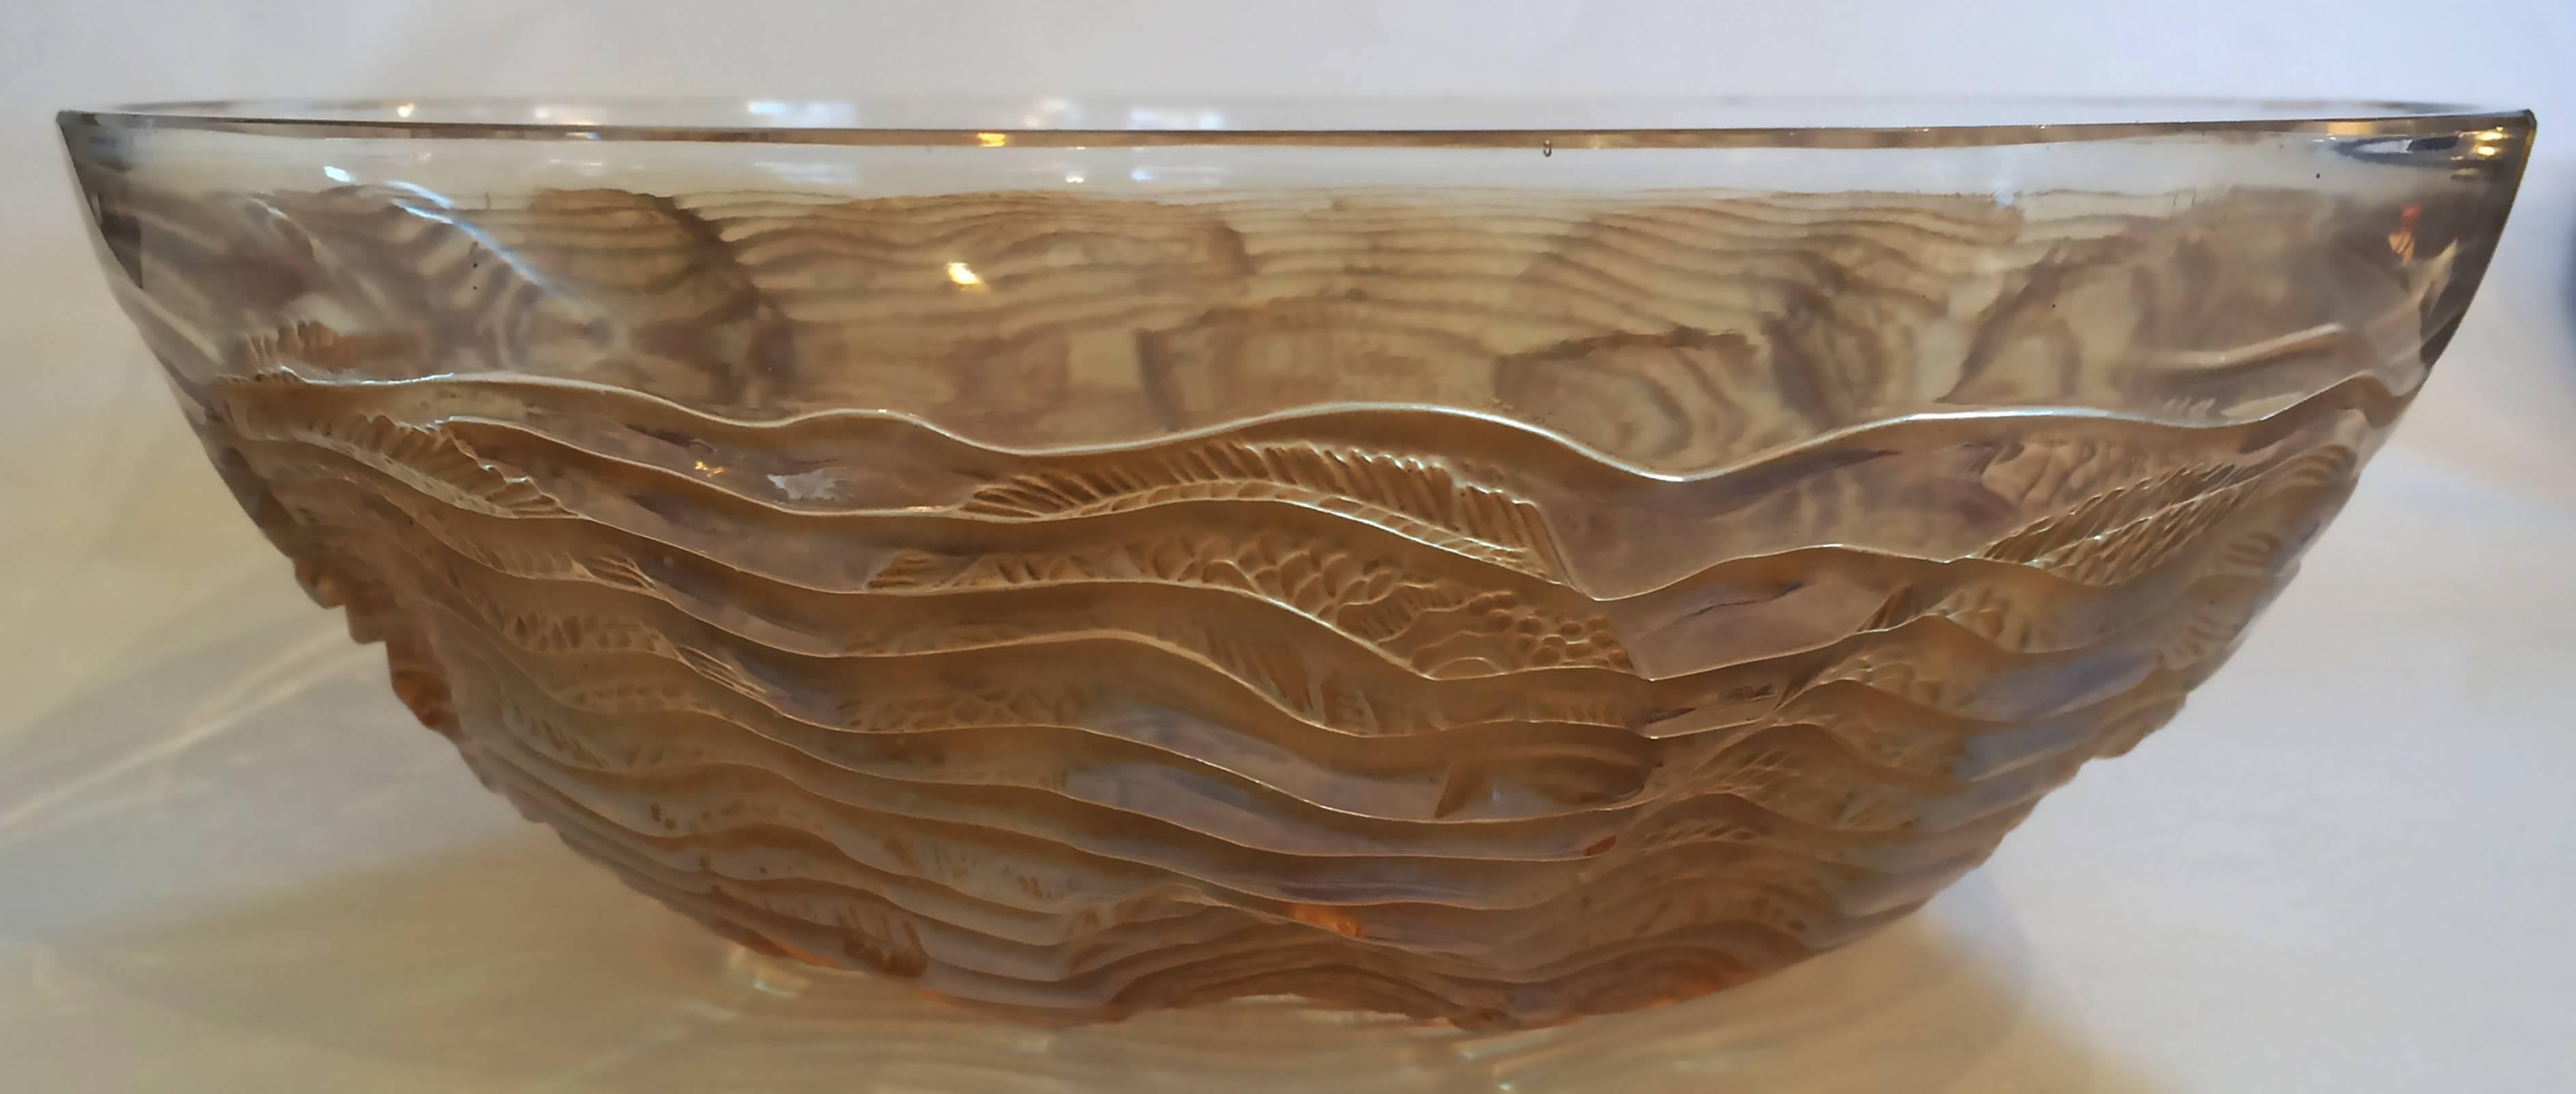 Art Deco bowl, goldfish with gold wash to fish and spiral seaweed. Deep carved design with fine detail to the fish, including scales and the seaweed in the form of a wave spiral starting at centre base, widening out to below the upper rim. Base is